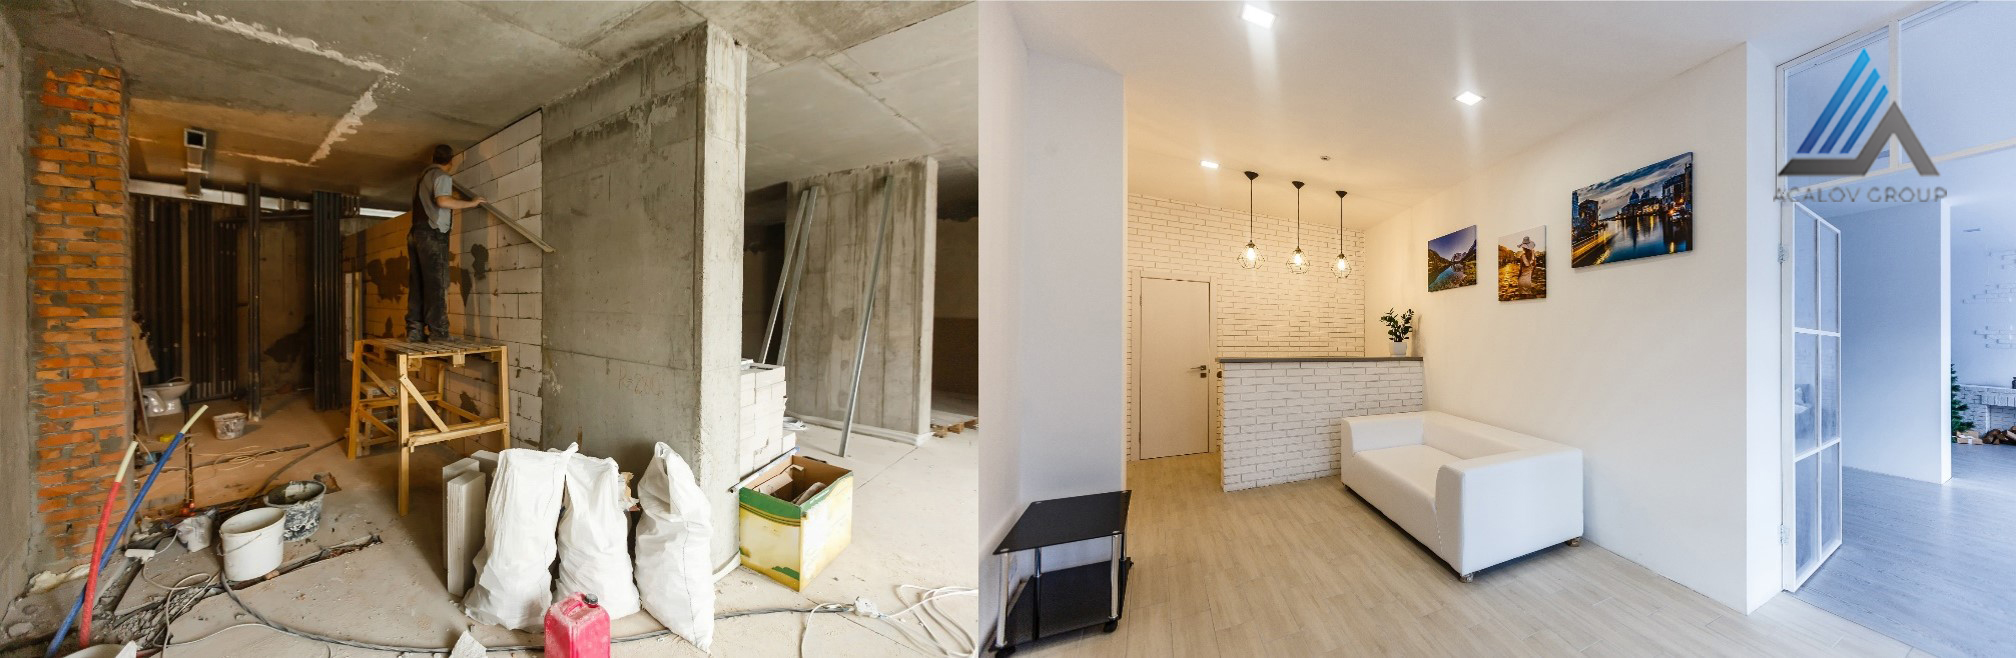 Apartment Renovation before after